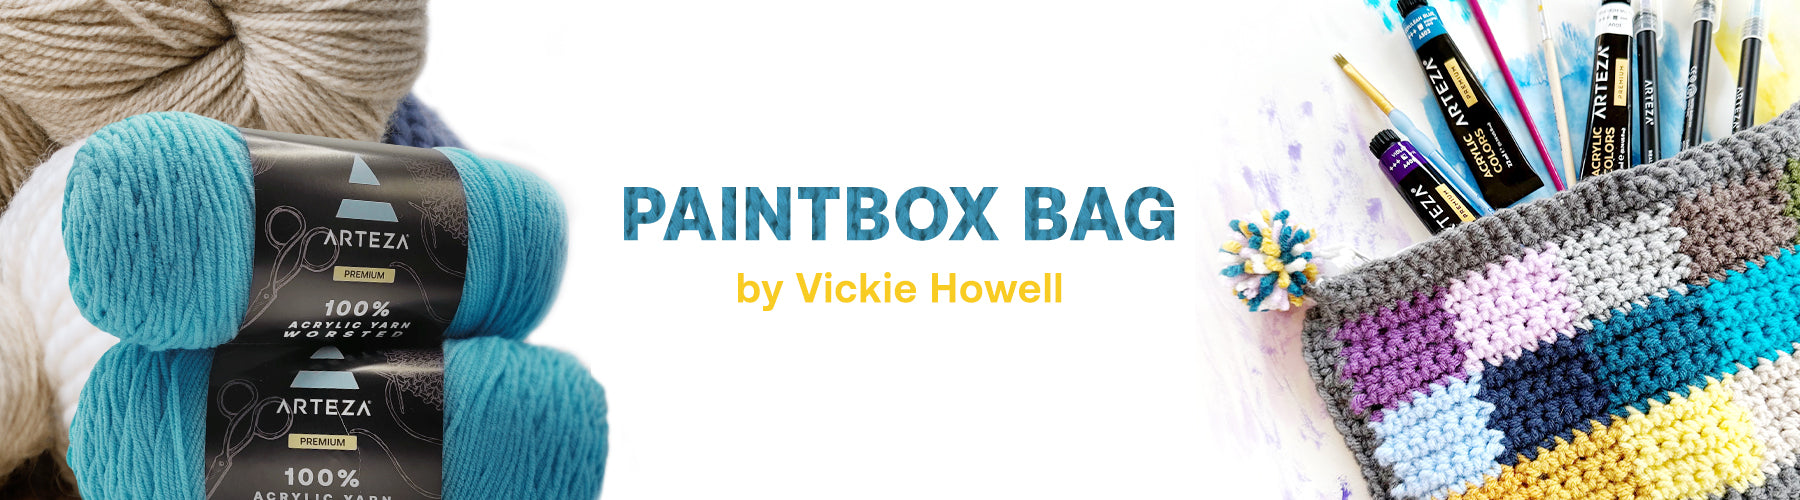 Paintbox Bag by Vickie Howell